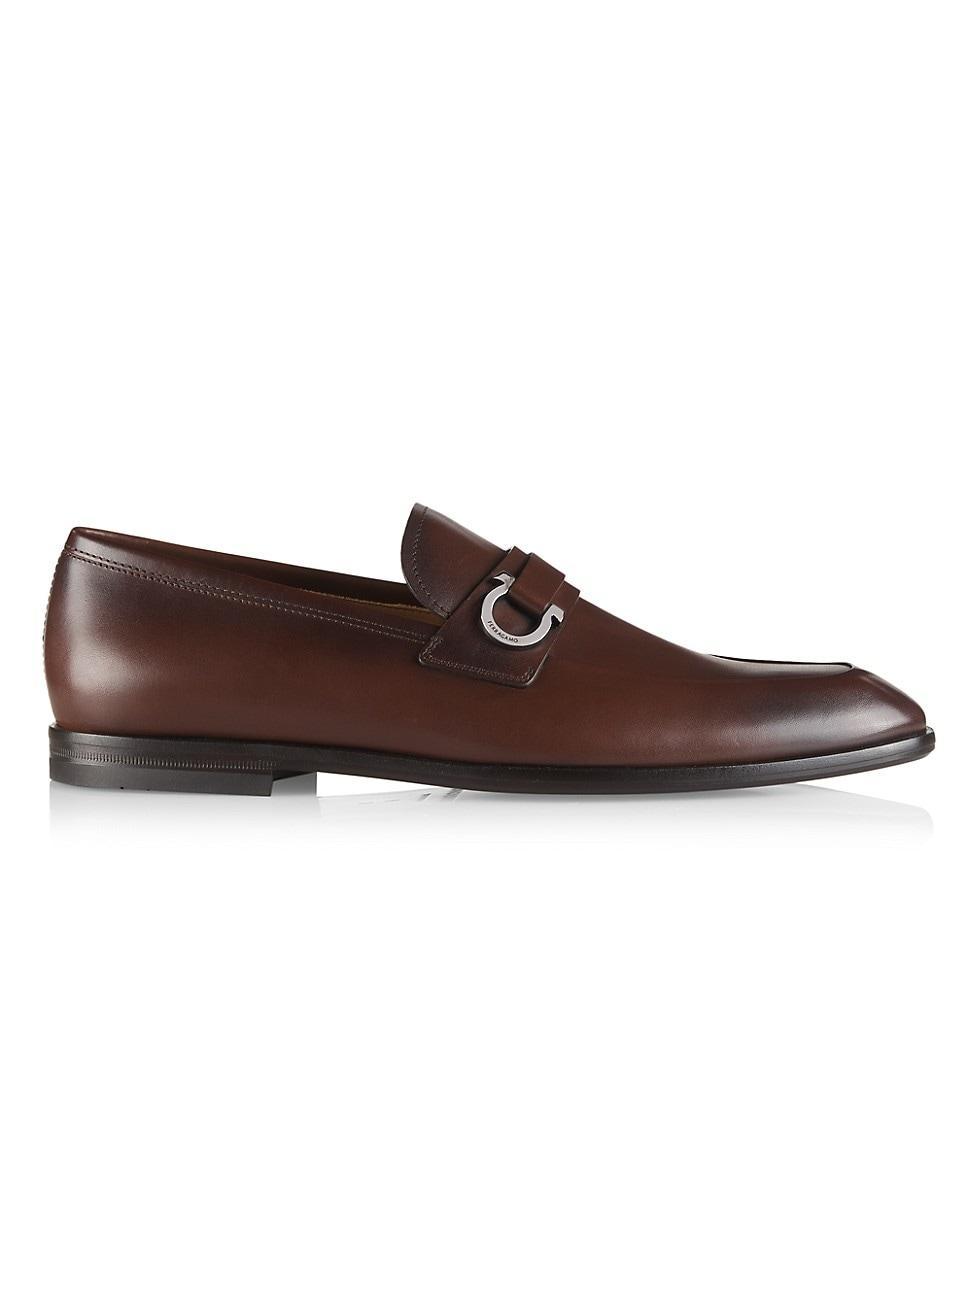 Mens Florio Leather Loafers Product Image